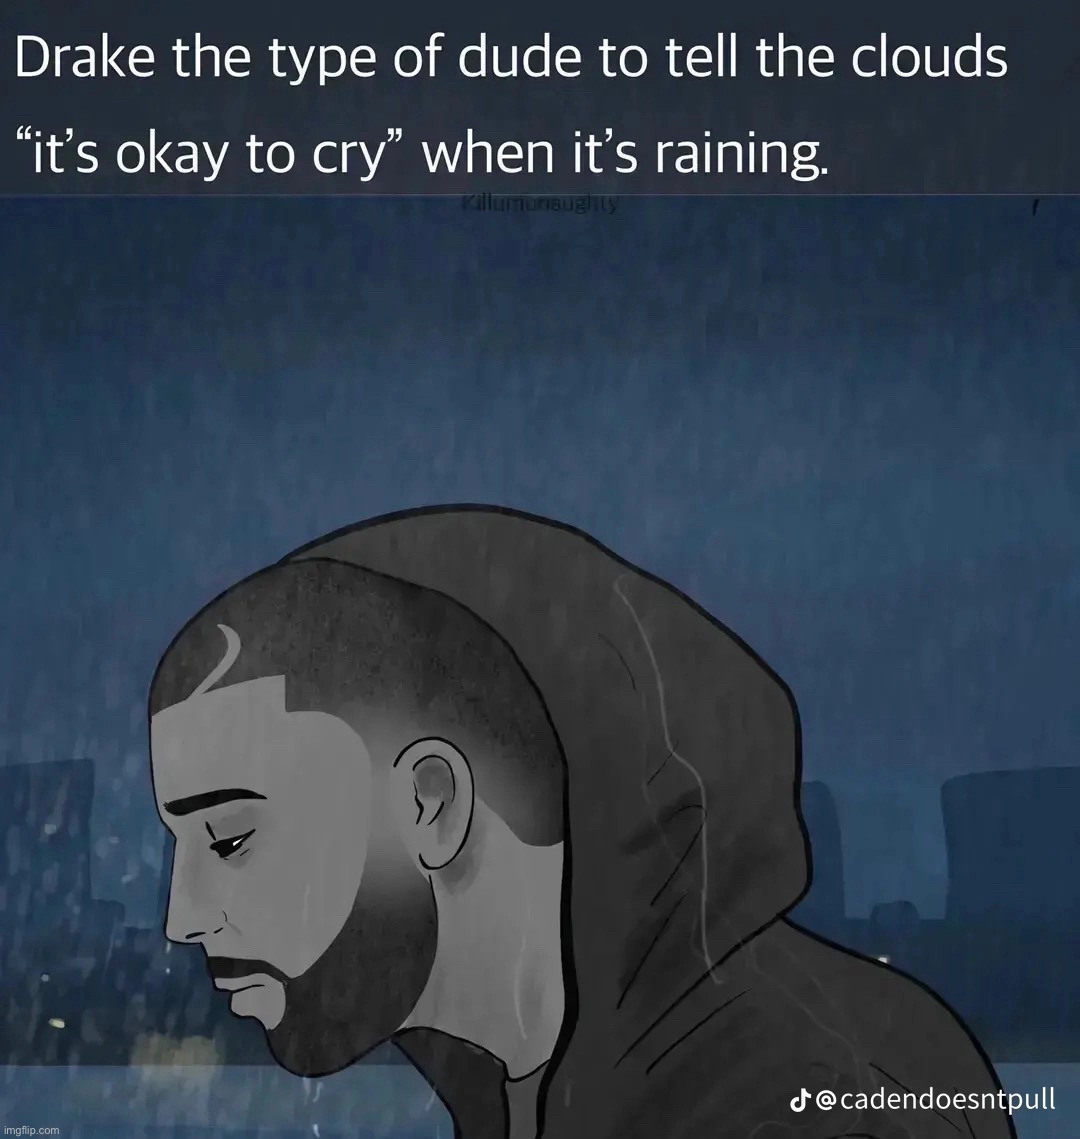 Drake’s that type of guy | image tagged in rap,funny,memes,drake,its okay to cry | made w/ Imgflip meme maker